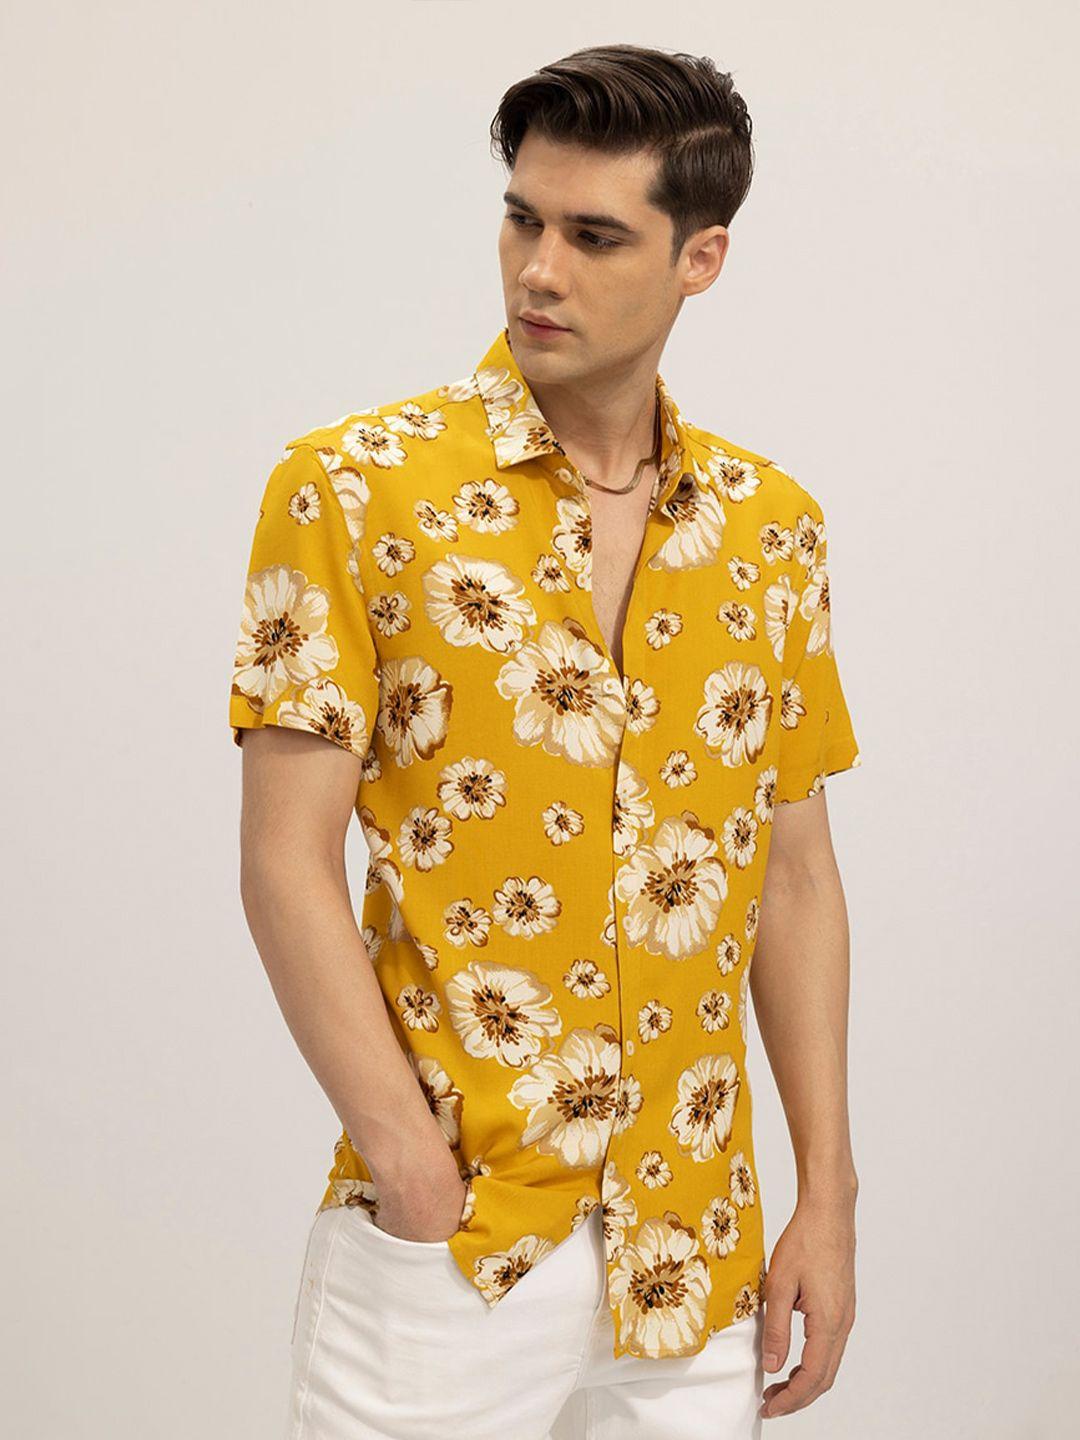 snitch-yellow-floral-printed-short-sleeves-slim-fit-casual-shirt